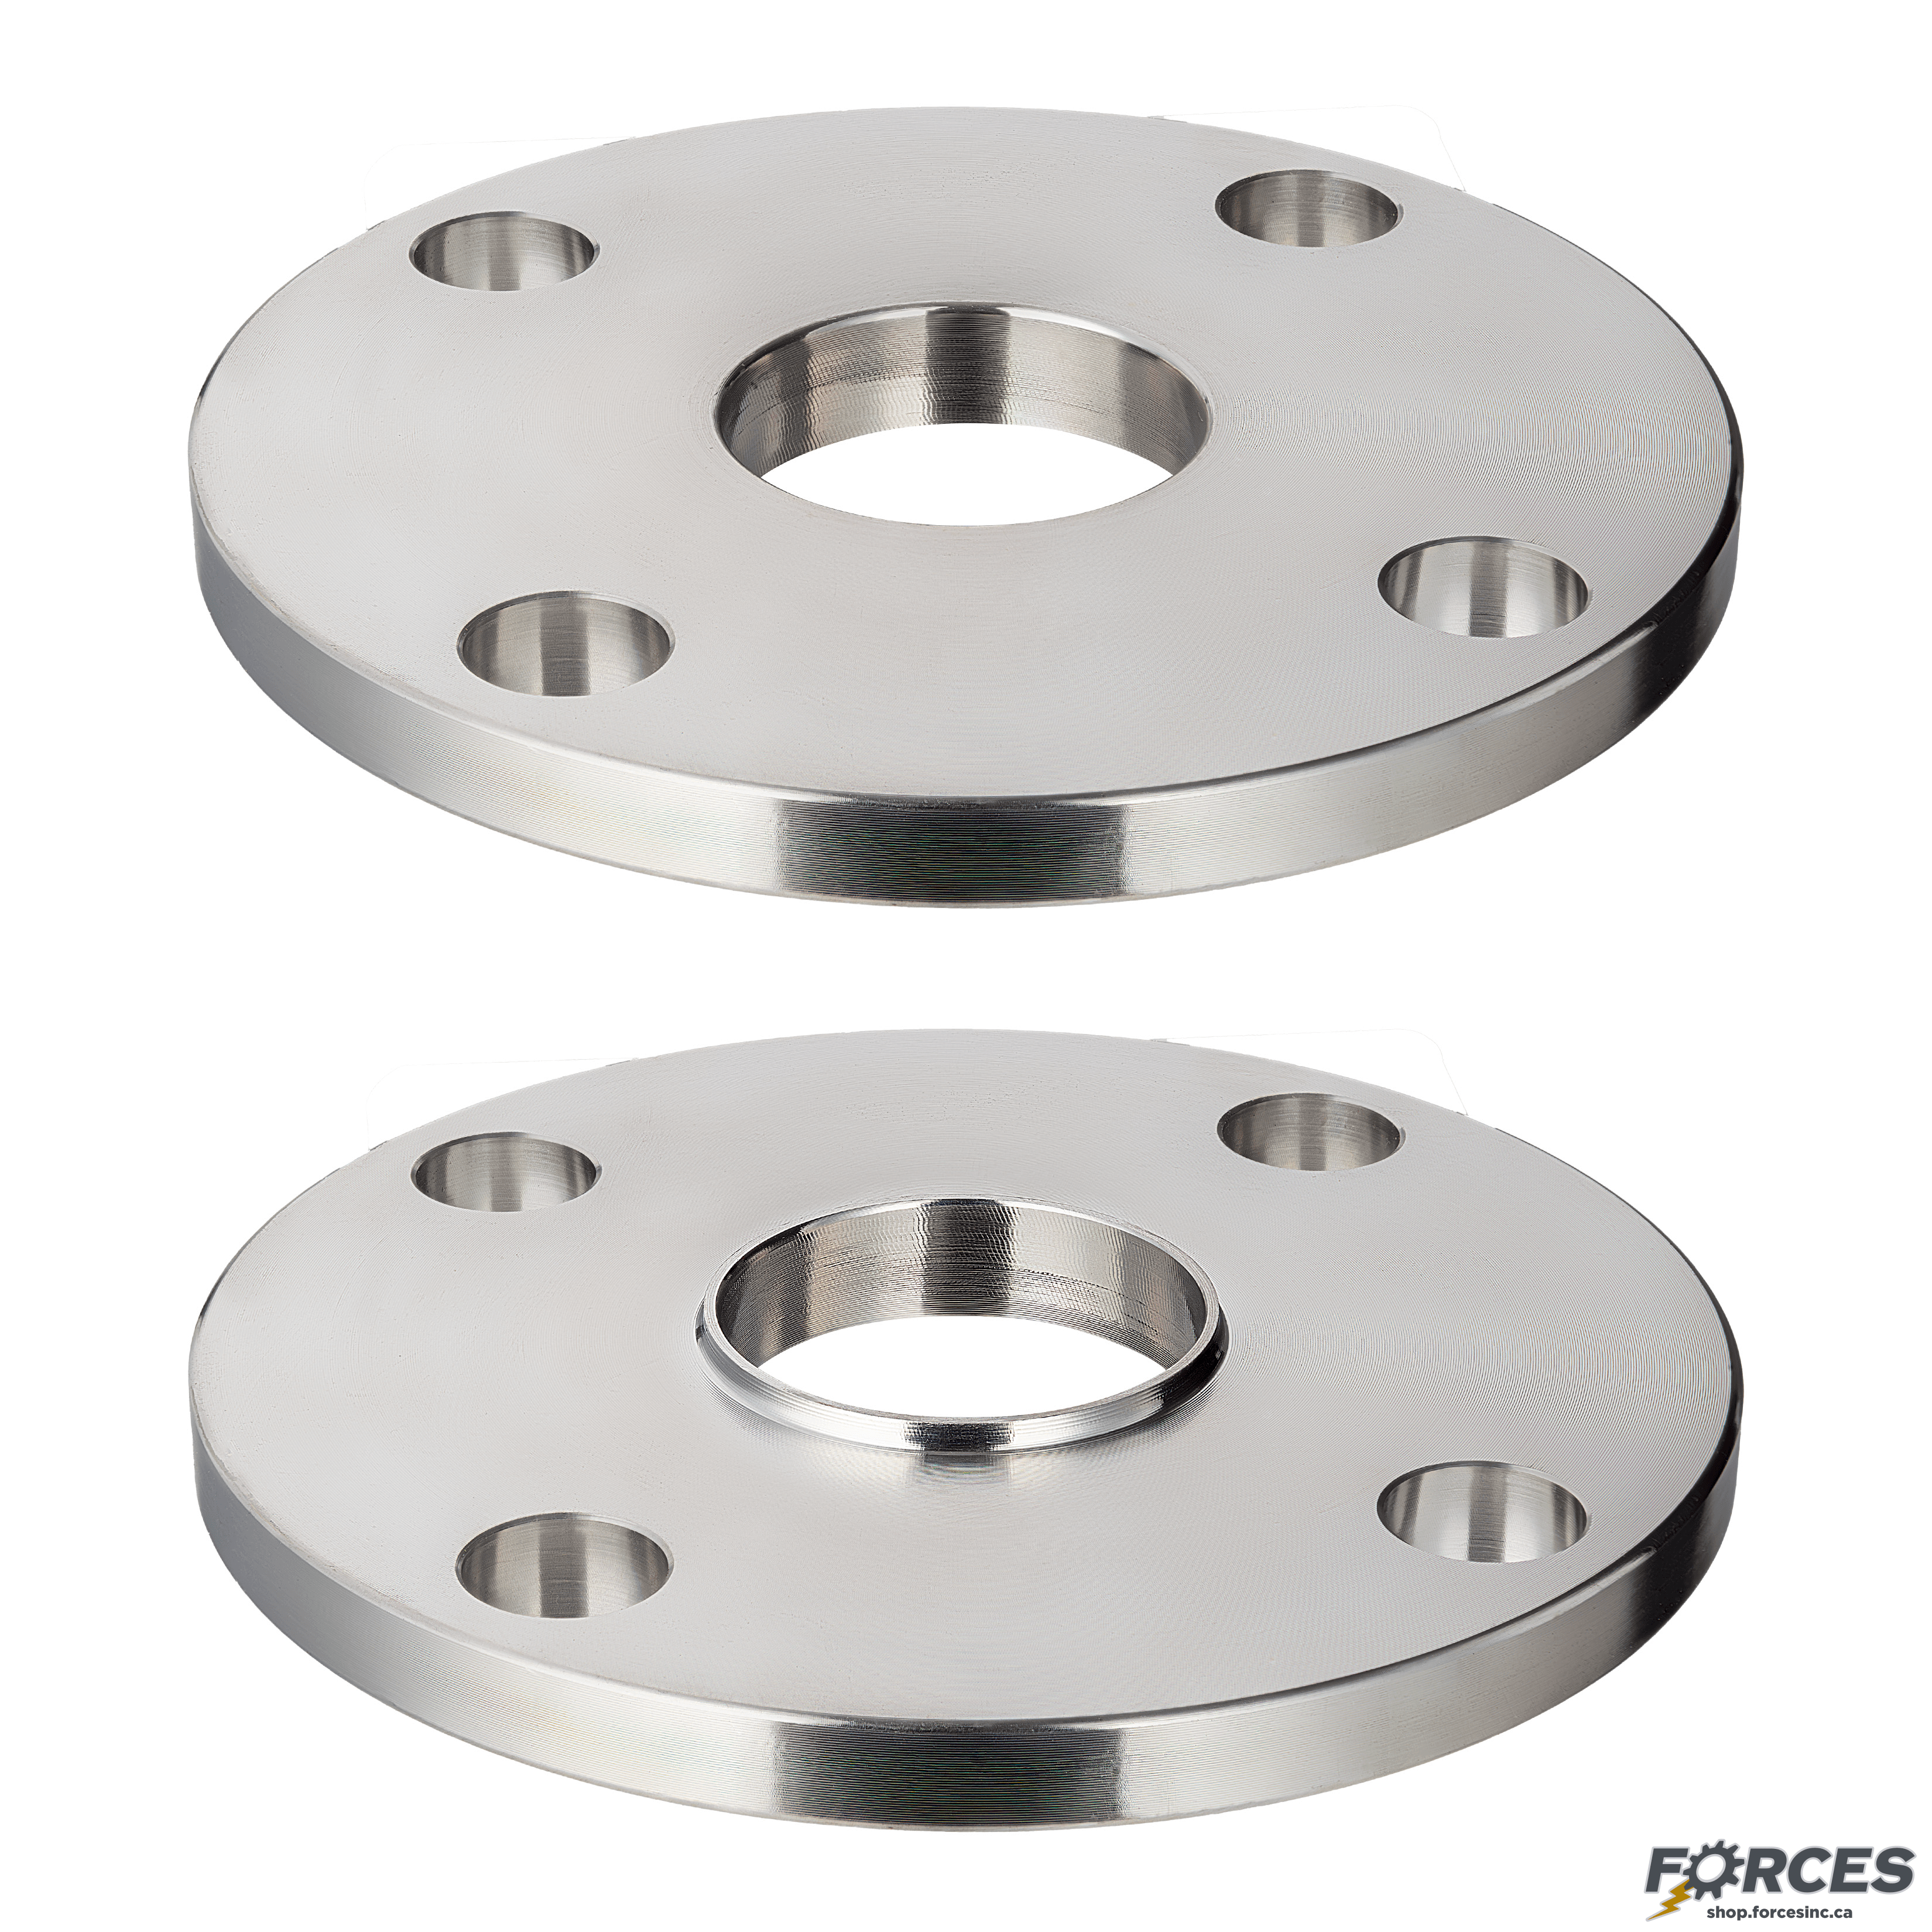 2-1/2" Weld-Neck Flange 38W - Stainless Steel 316 - Forces Inc